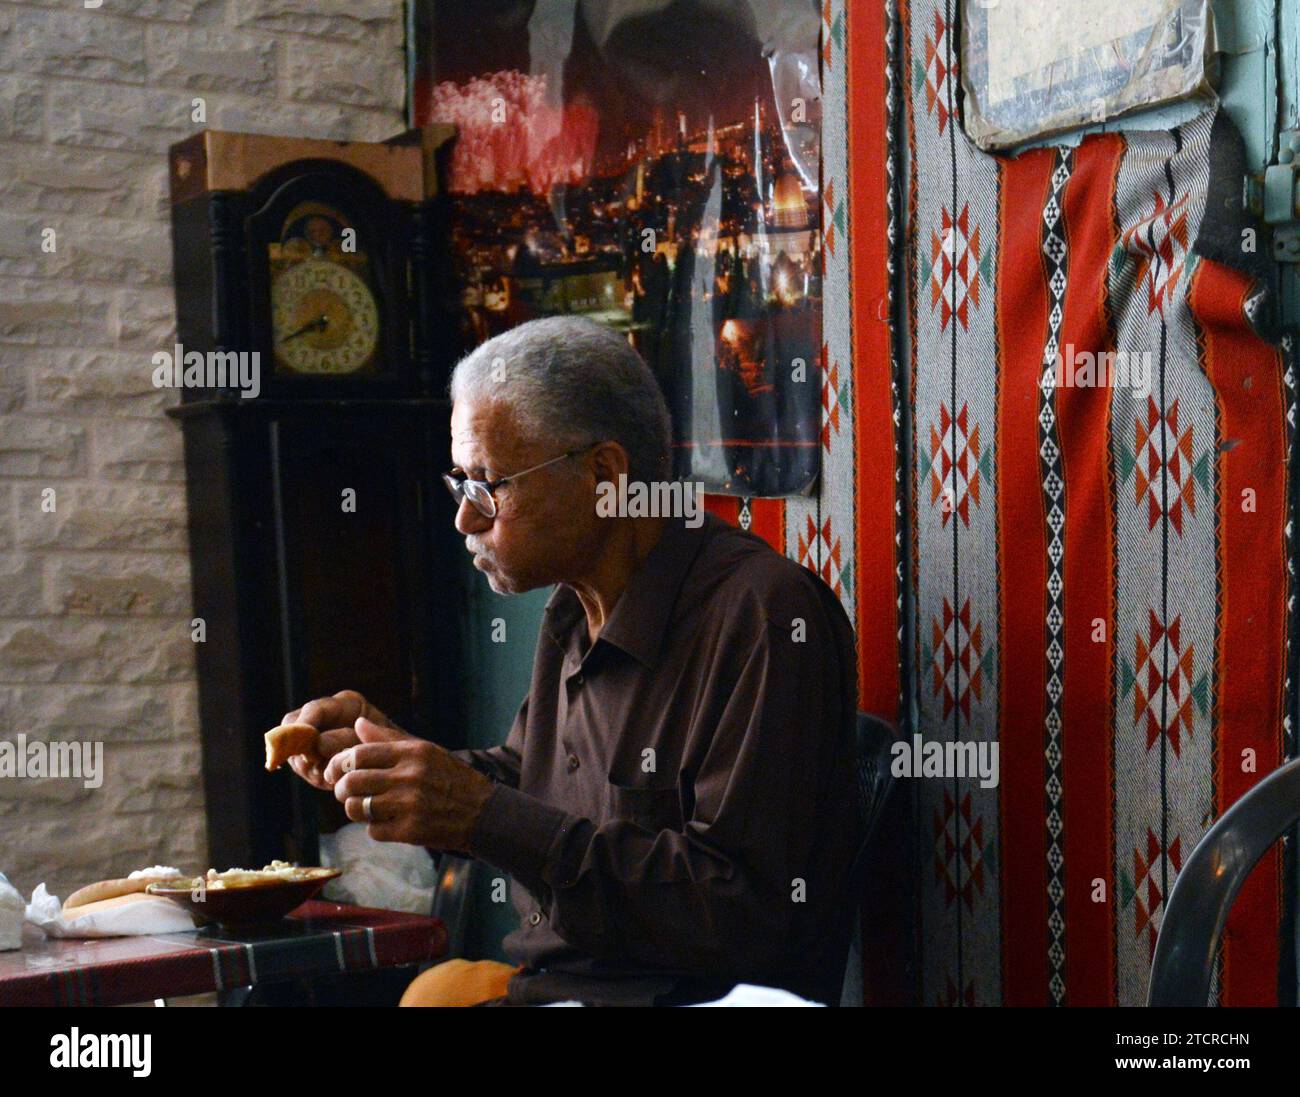 A Palestinian man eating hummus at Hummus Abu Kamel in the Christian quarter of the old city of Jerusalem. Stock Photo